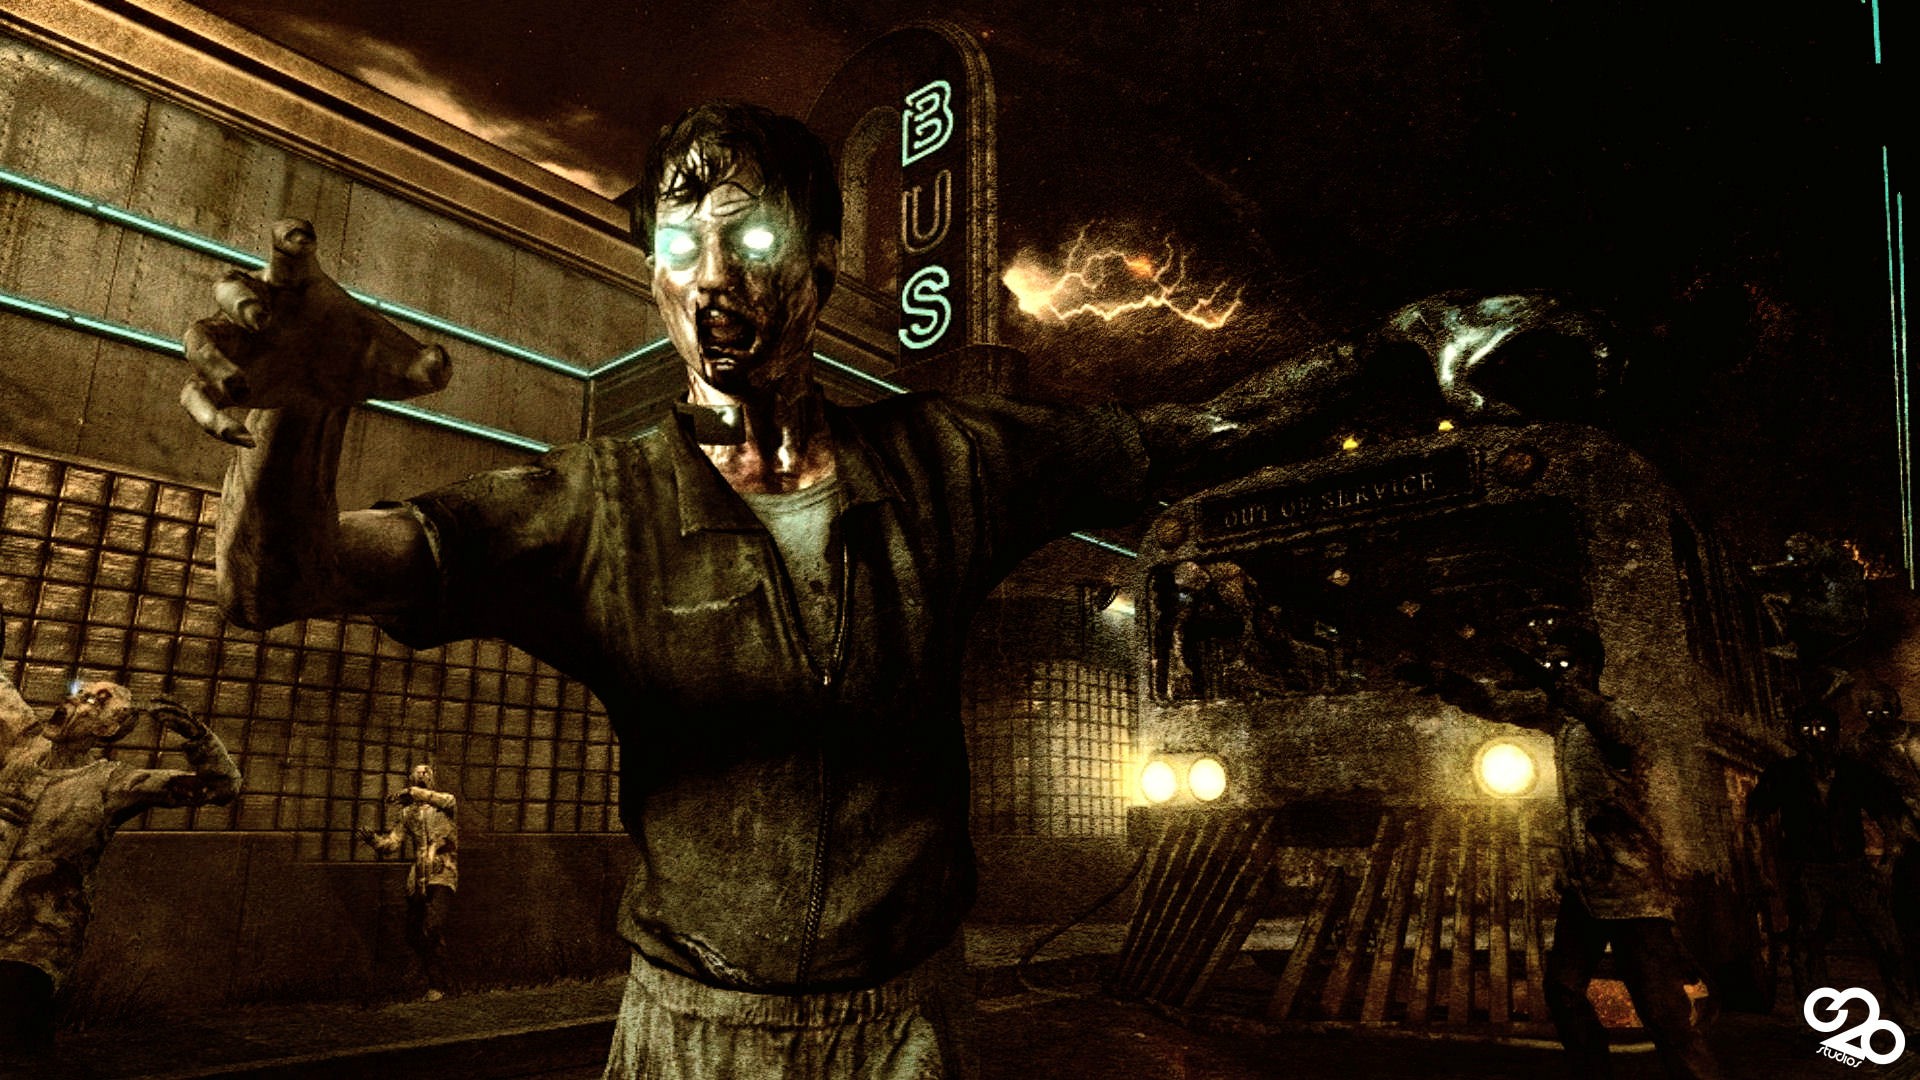 2New Zombie Wallpapers. | The Unofficial Call of Duty Forums ...